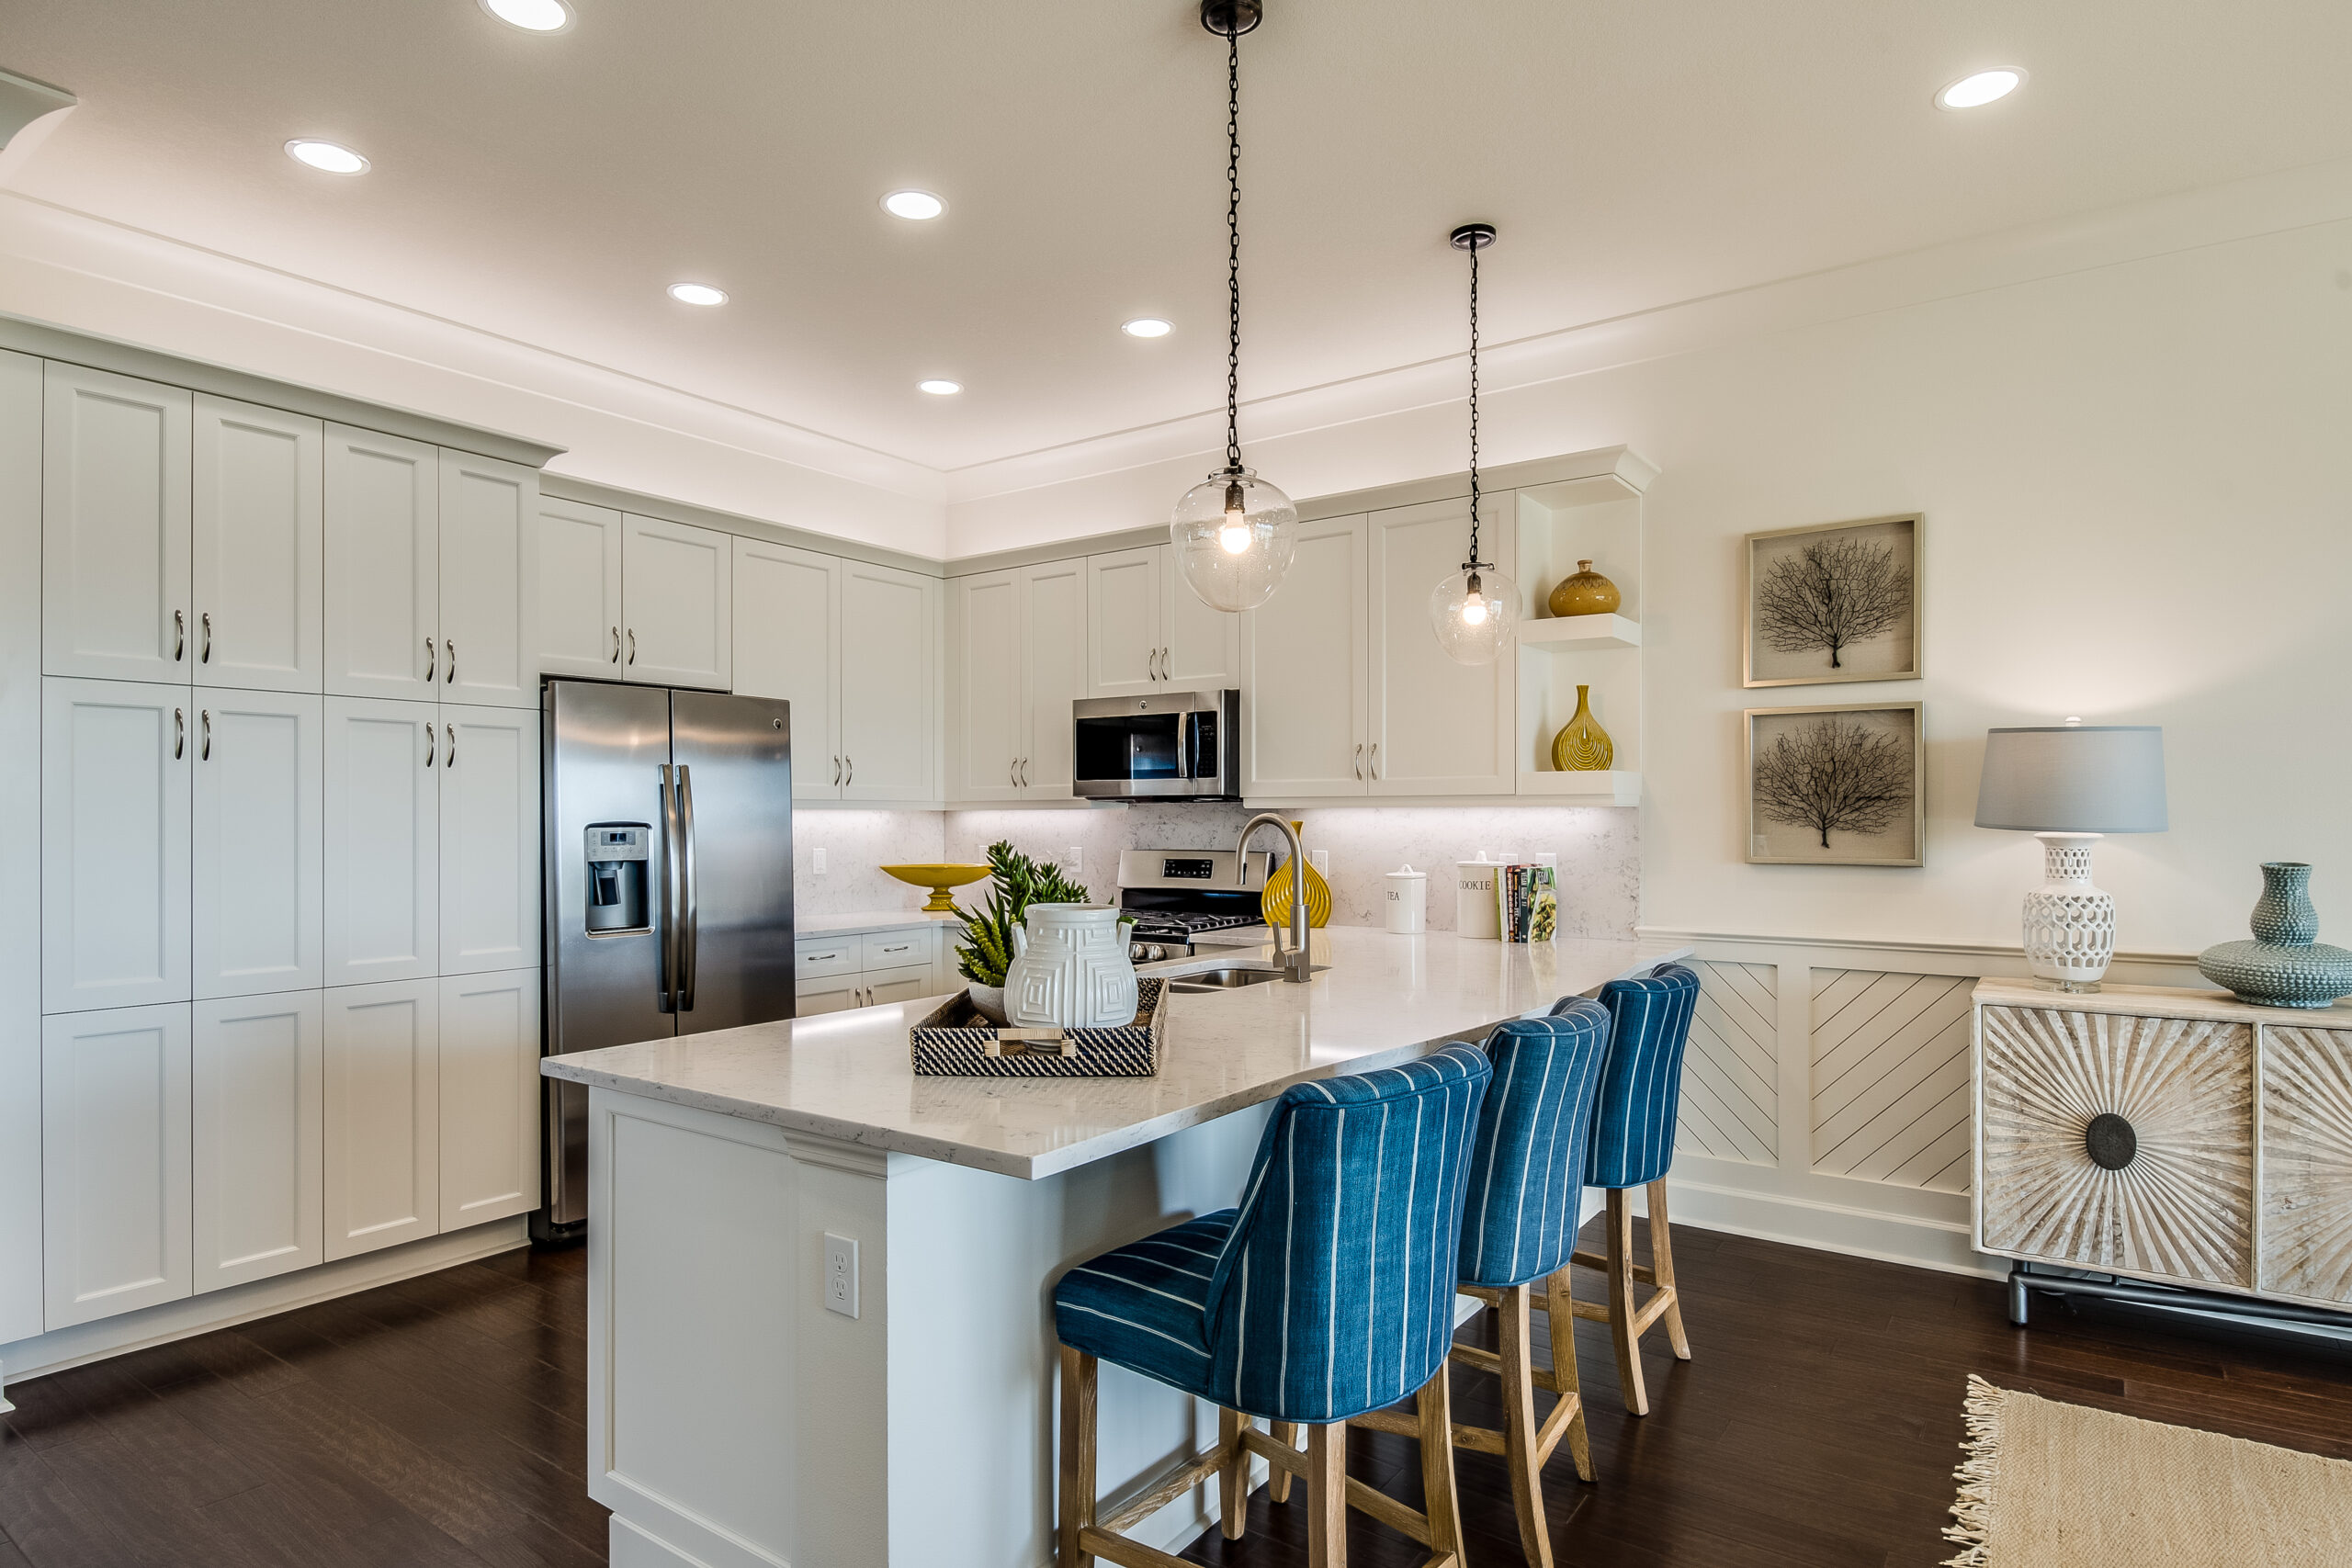 Renter Friendly Kitchen Lighting: 7 Stunning, But Practical Ideas Every Renter Should Know!